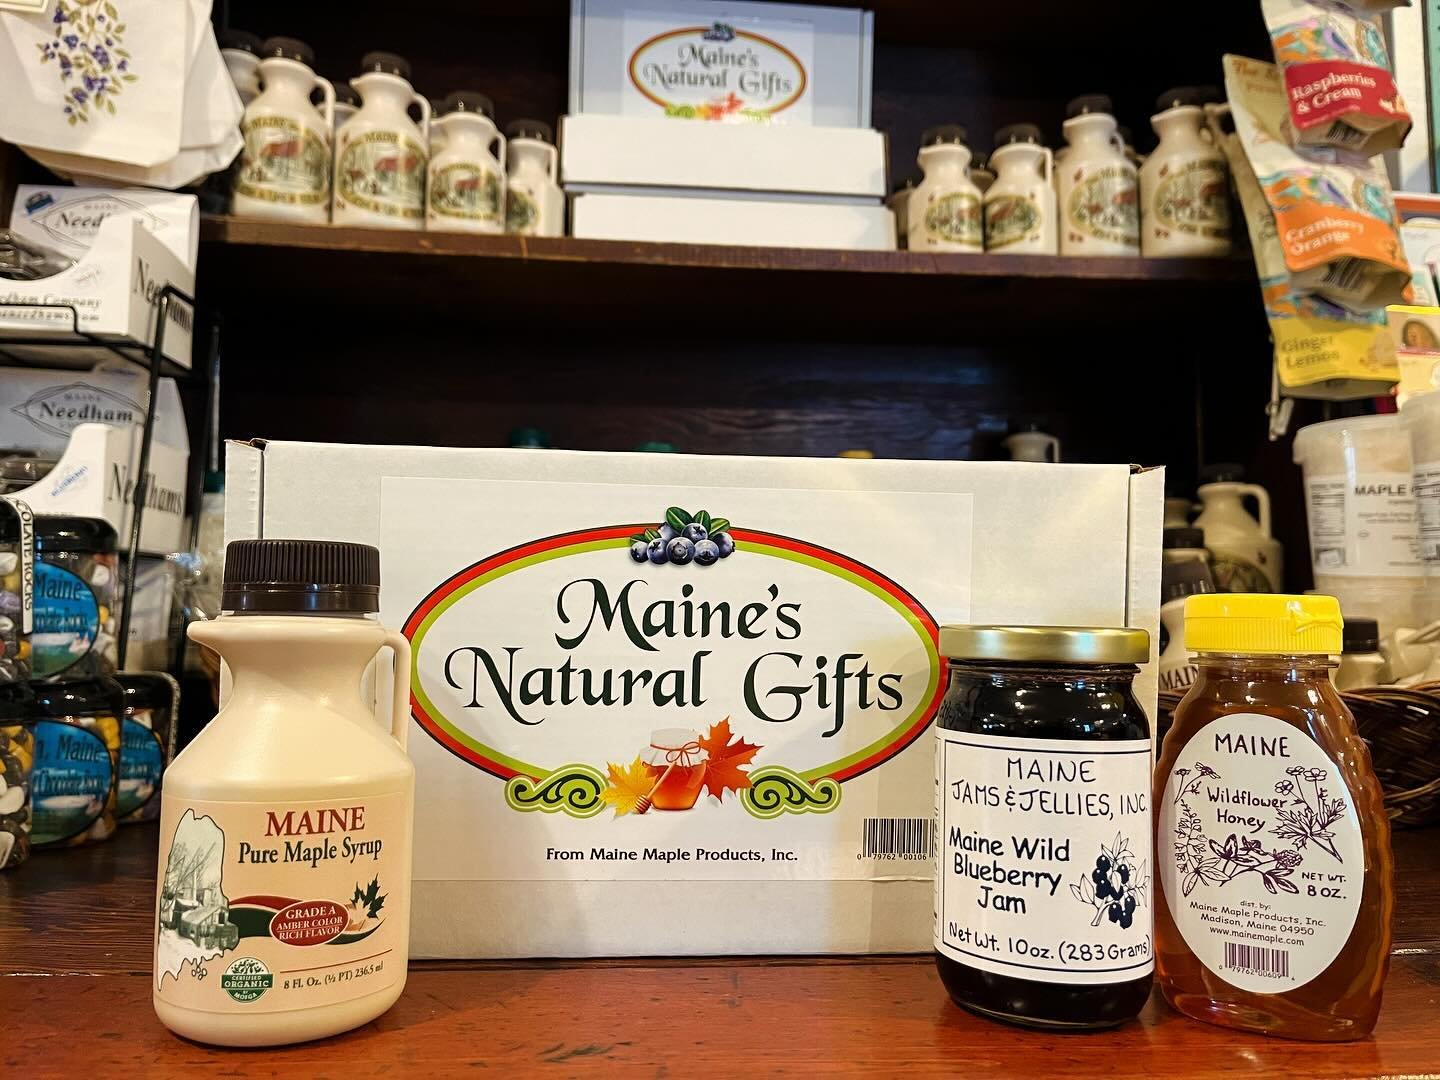 Our tasty Maine gift box features wild Maine blueberry jam, delicious Maine maple syrup, and sweet Maine wildflower honey. 

All our favorite treats in one package!

Just add a stack of pancakes - blueberry, of course! 
 
Available in store and onlin